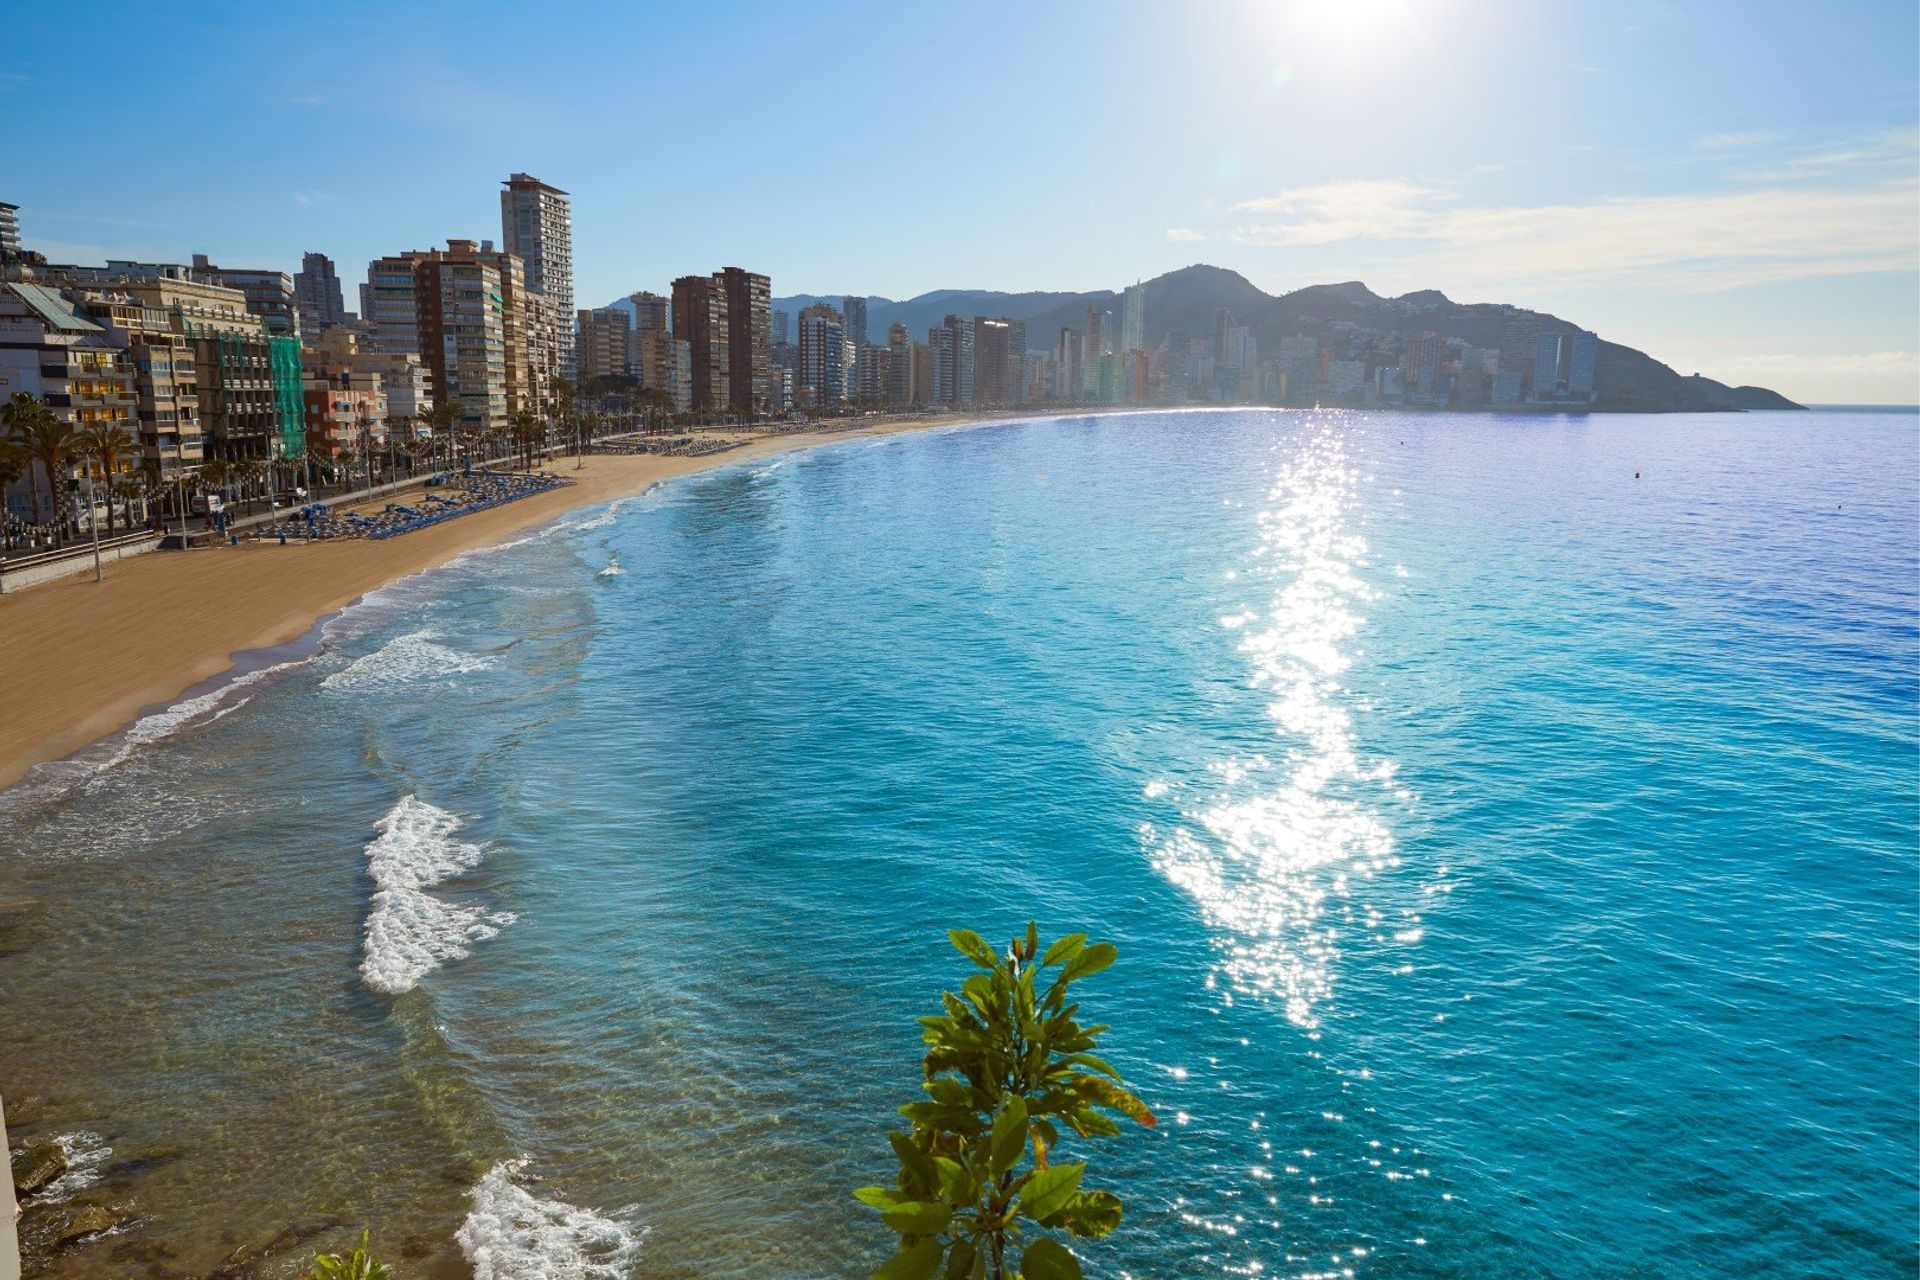 The sparkling blue waters of Levante beach, Benidorm